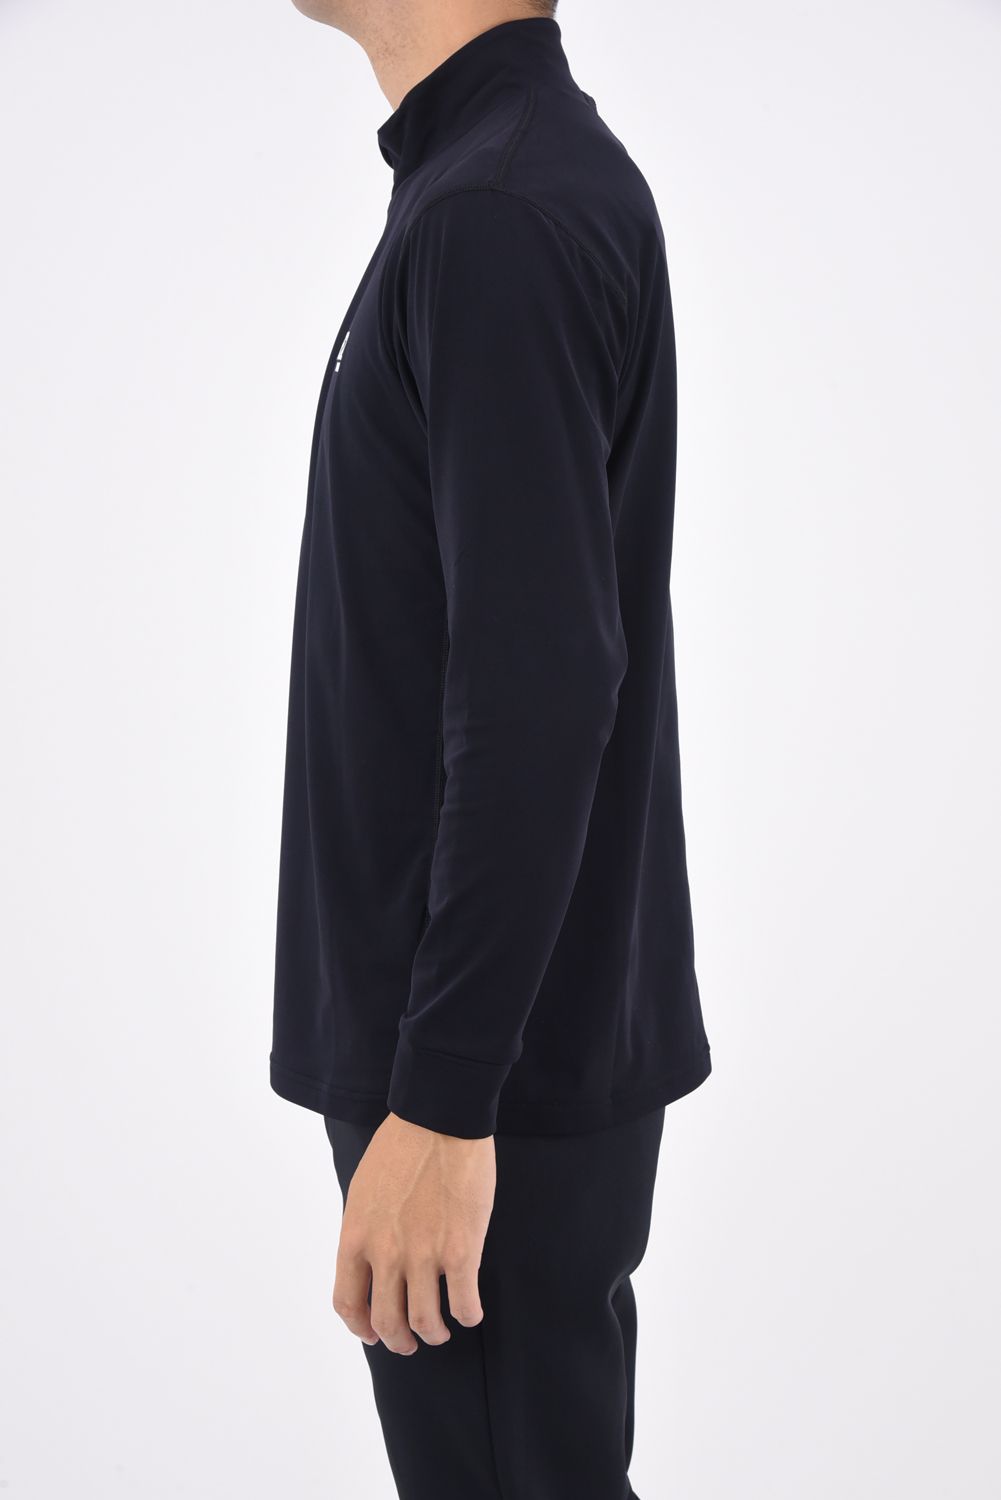 SY32 by SWEET YEARS GOLF - 【ABSOLUTE】 CARVICO ZIP UP MOCK NECK 